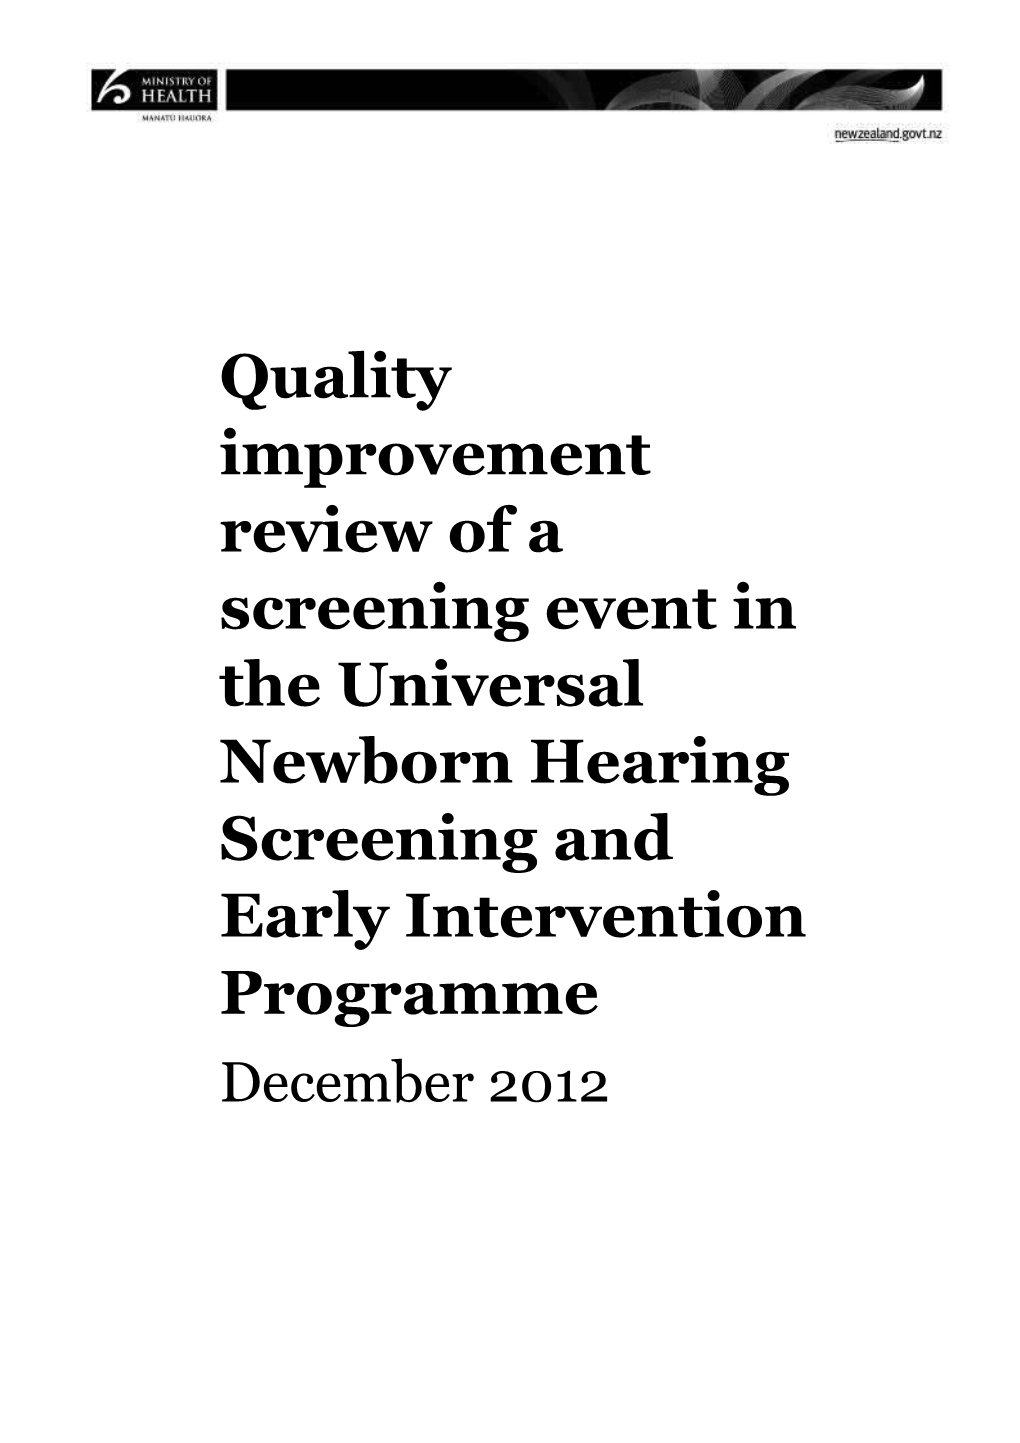 Quality Improvement Review of a Screening Event in the Universal Newborn Hearing Screening